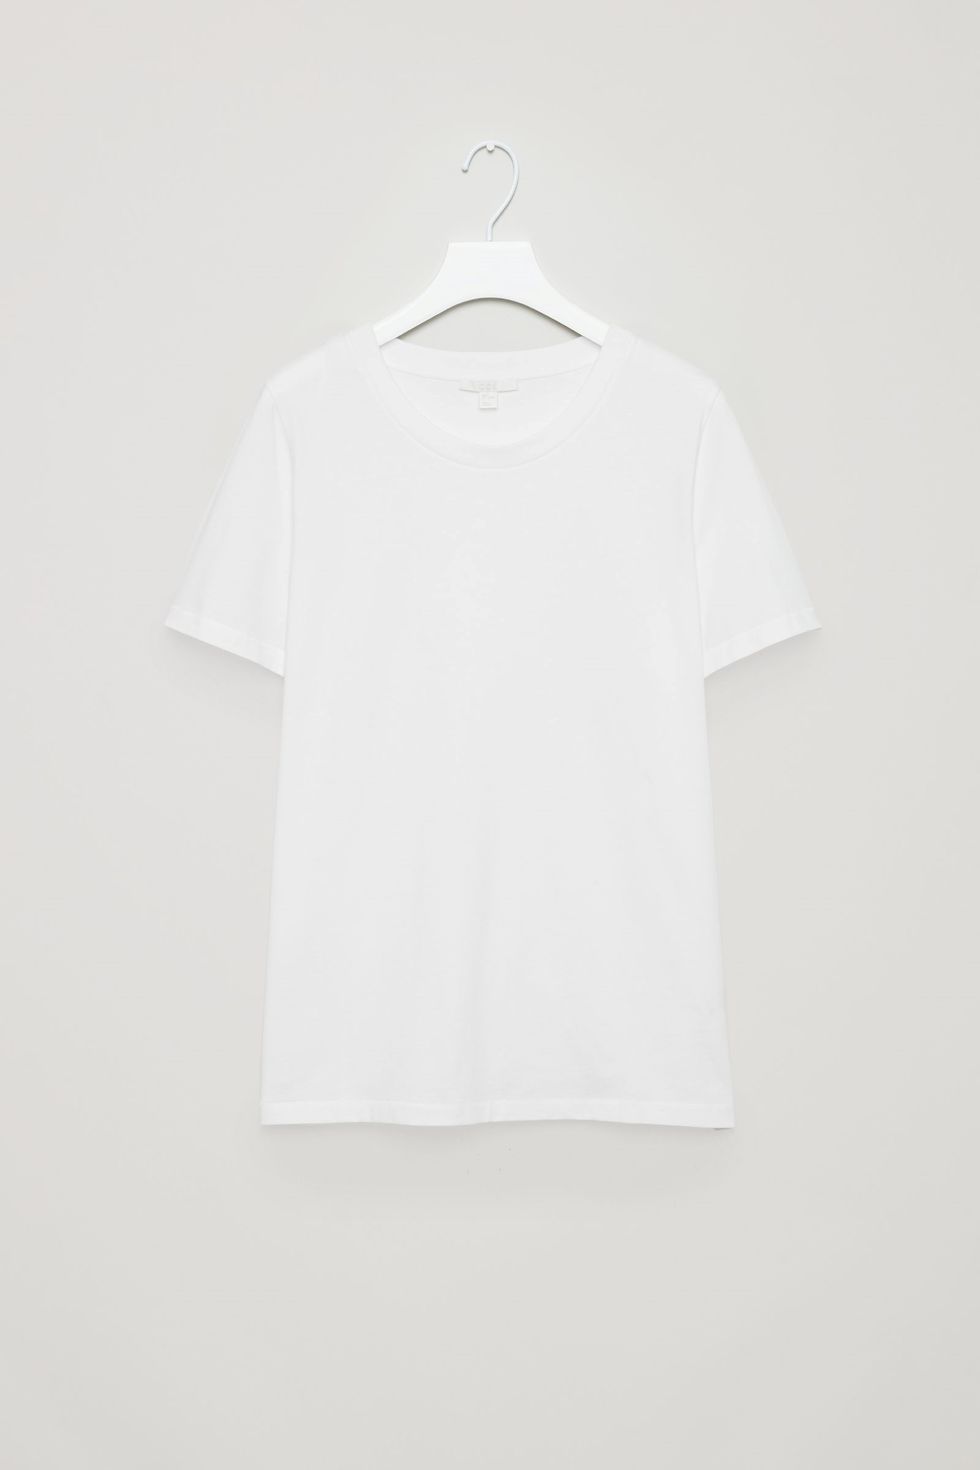 White, Clothing, T-shirt, Sleeve, Top, Collar, Clothes hanger, Outerwear, Neck, Shirt, 